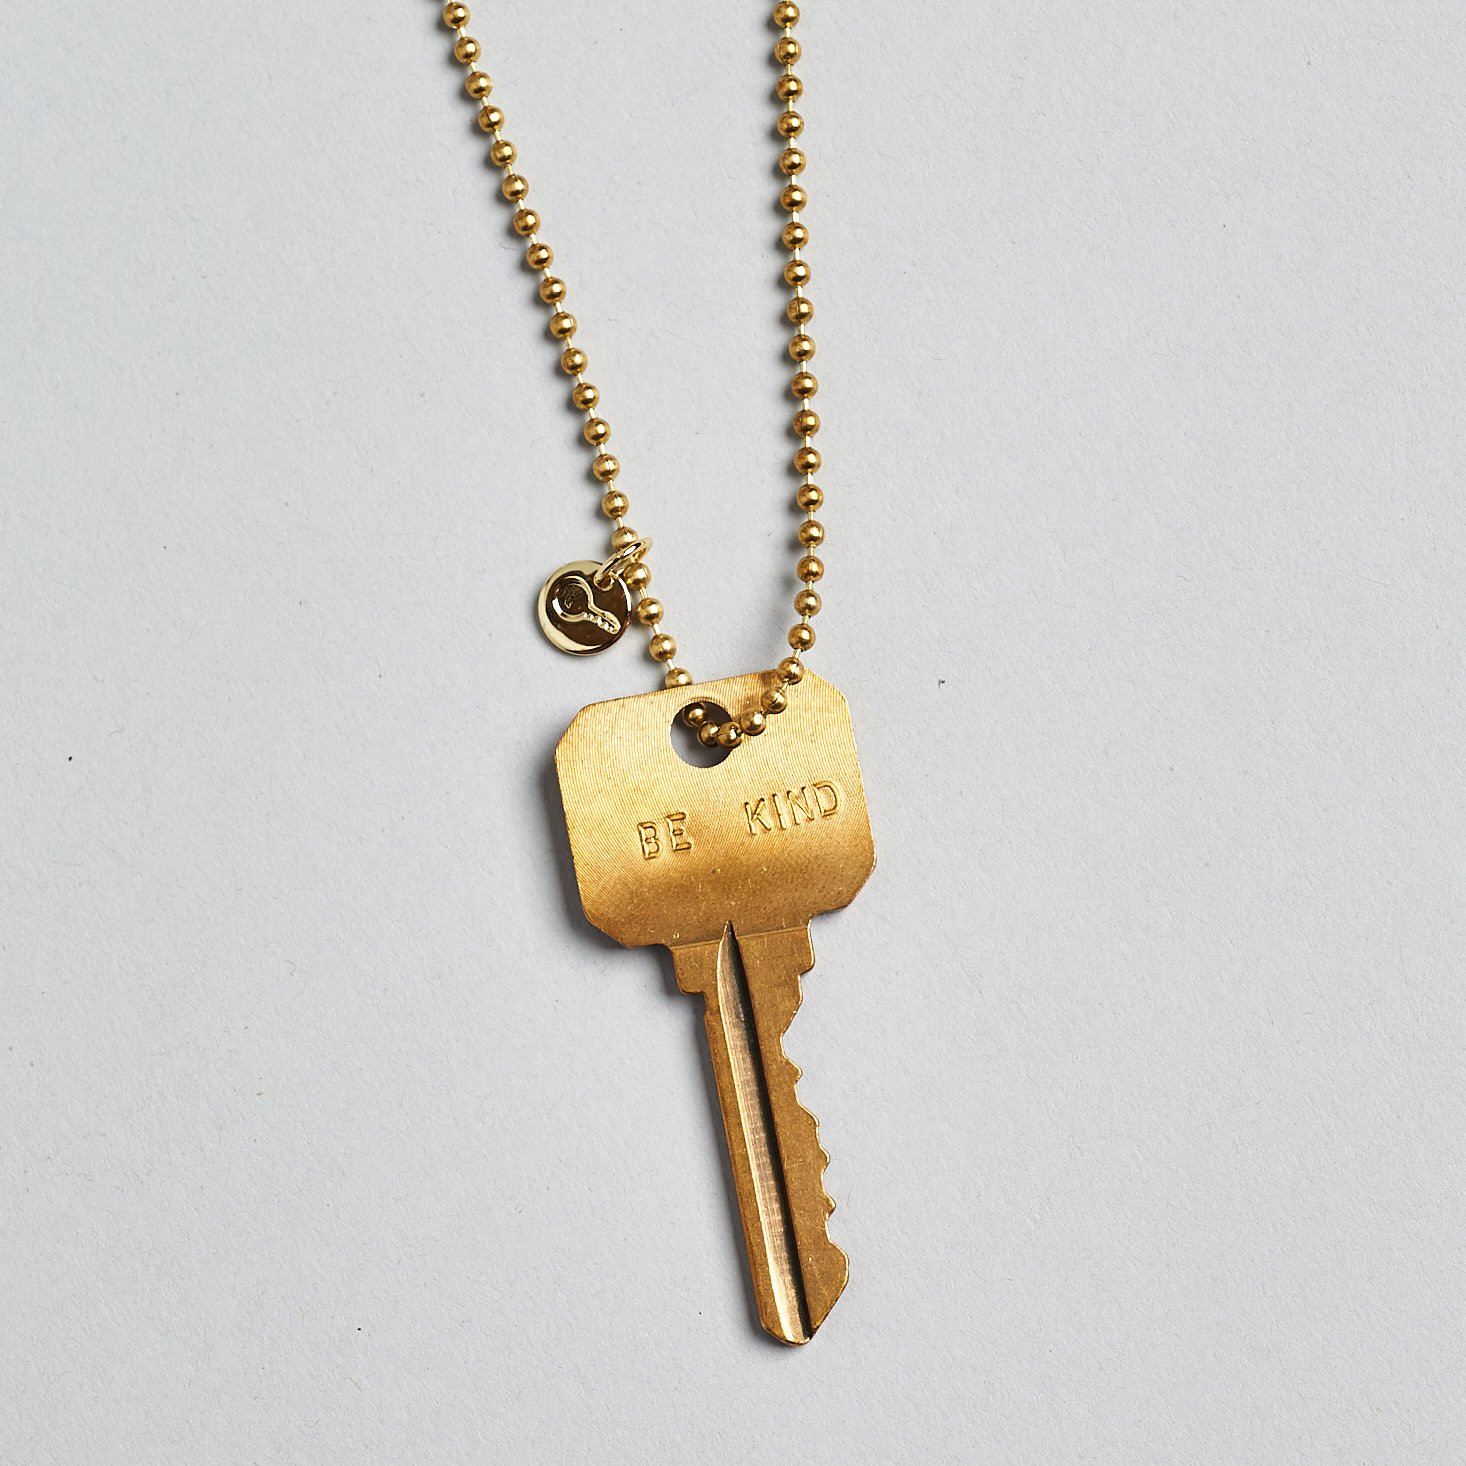 Love Goodly May 2019 review key necklace